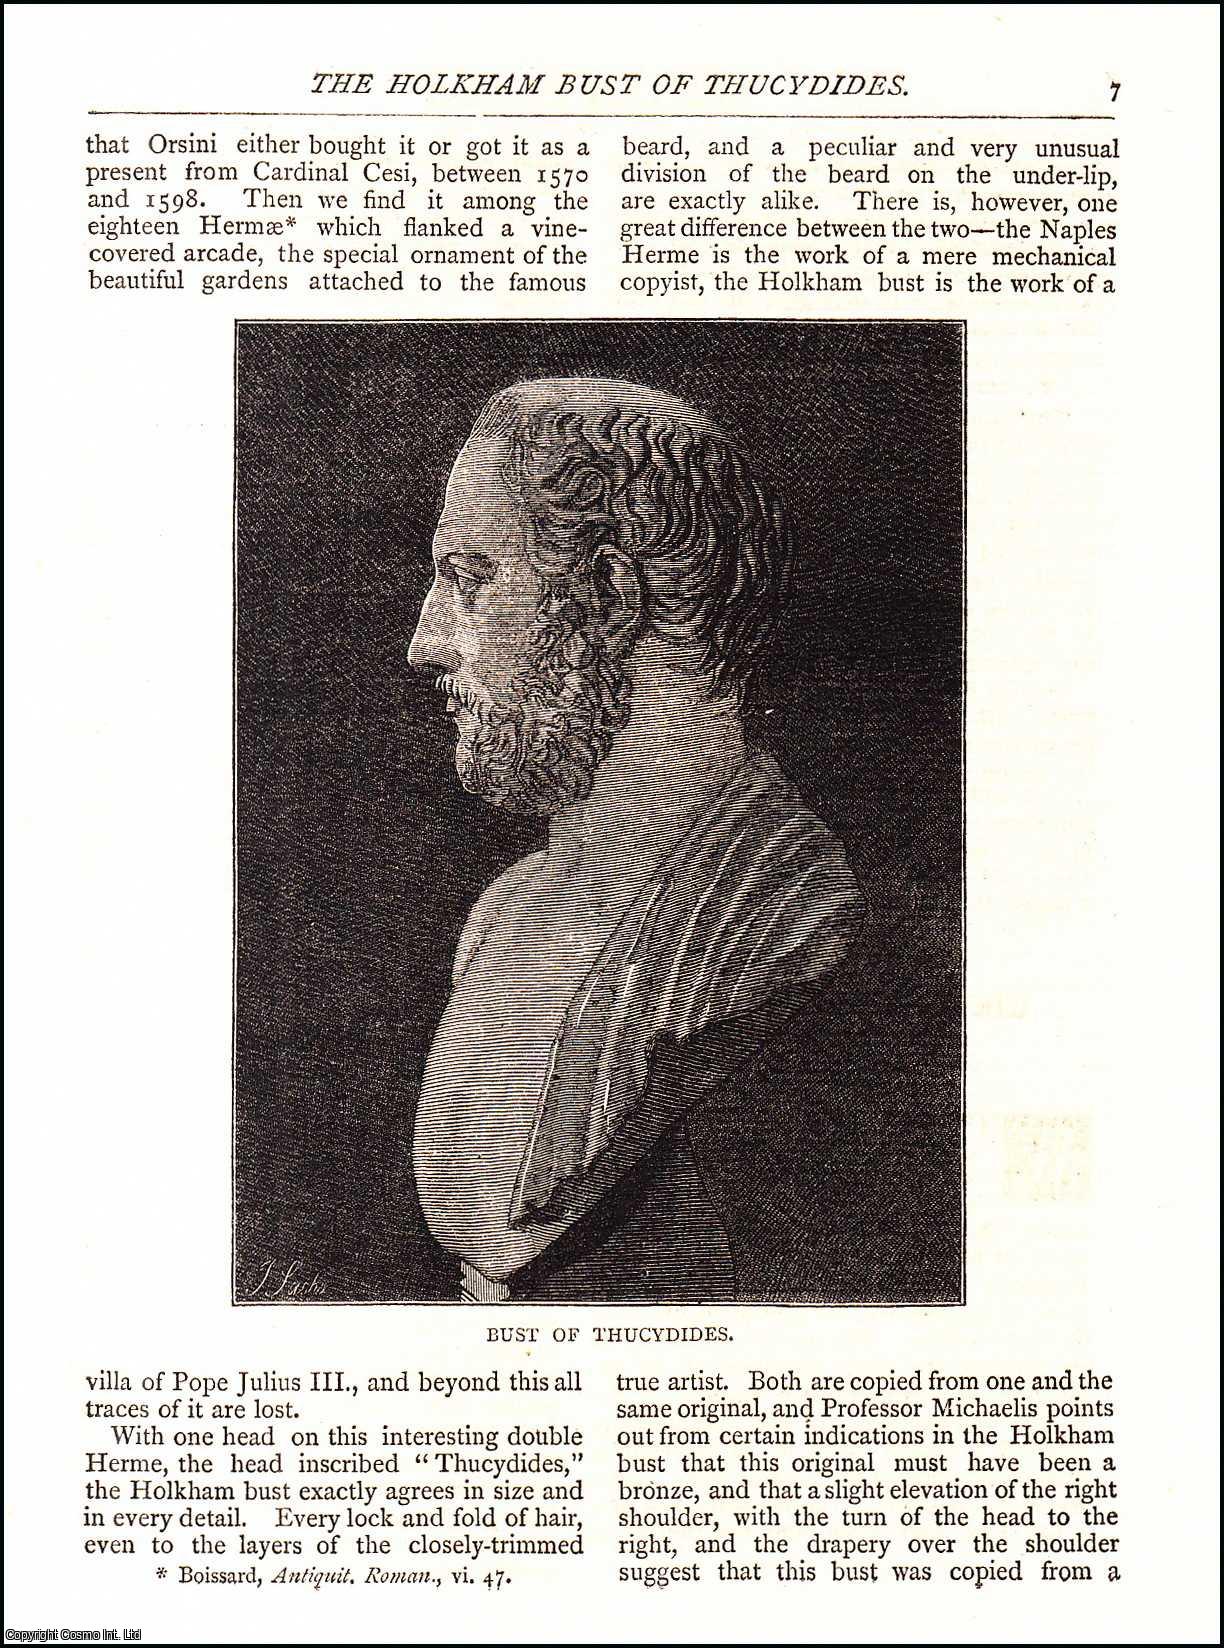 R. N. - The Holkham Bust of Thucydides. An original article from The Antiquary Magazine, 1882.